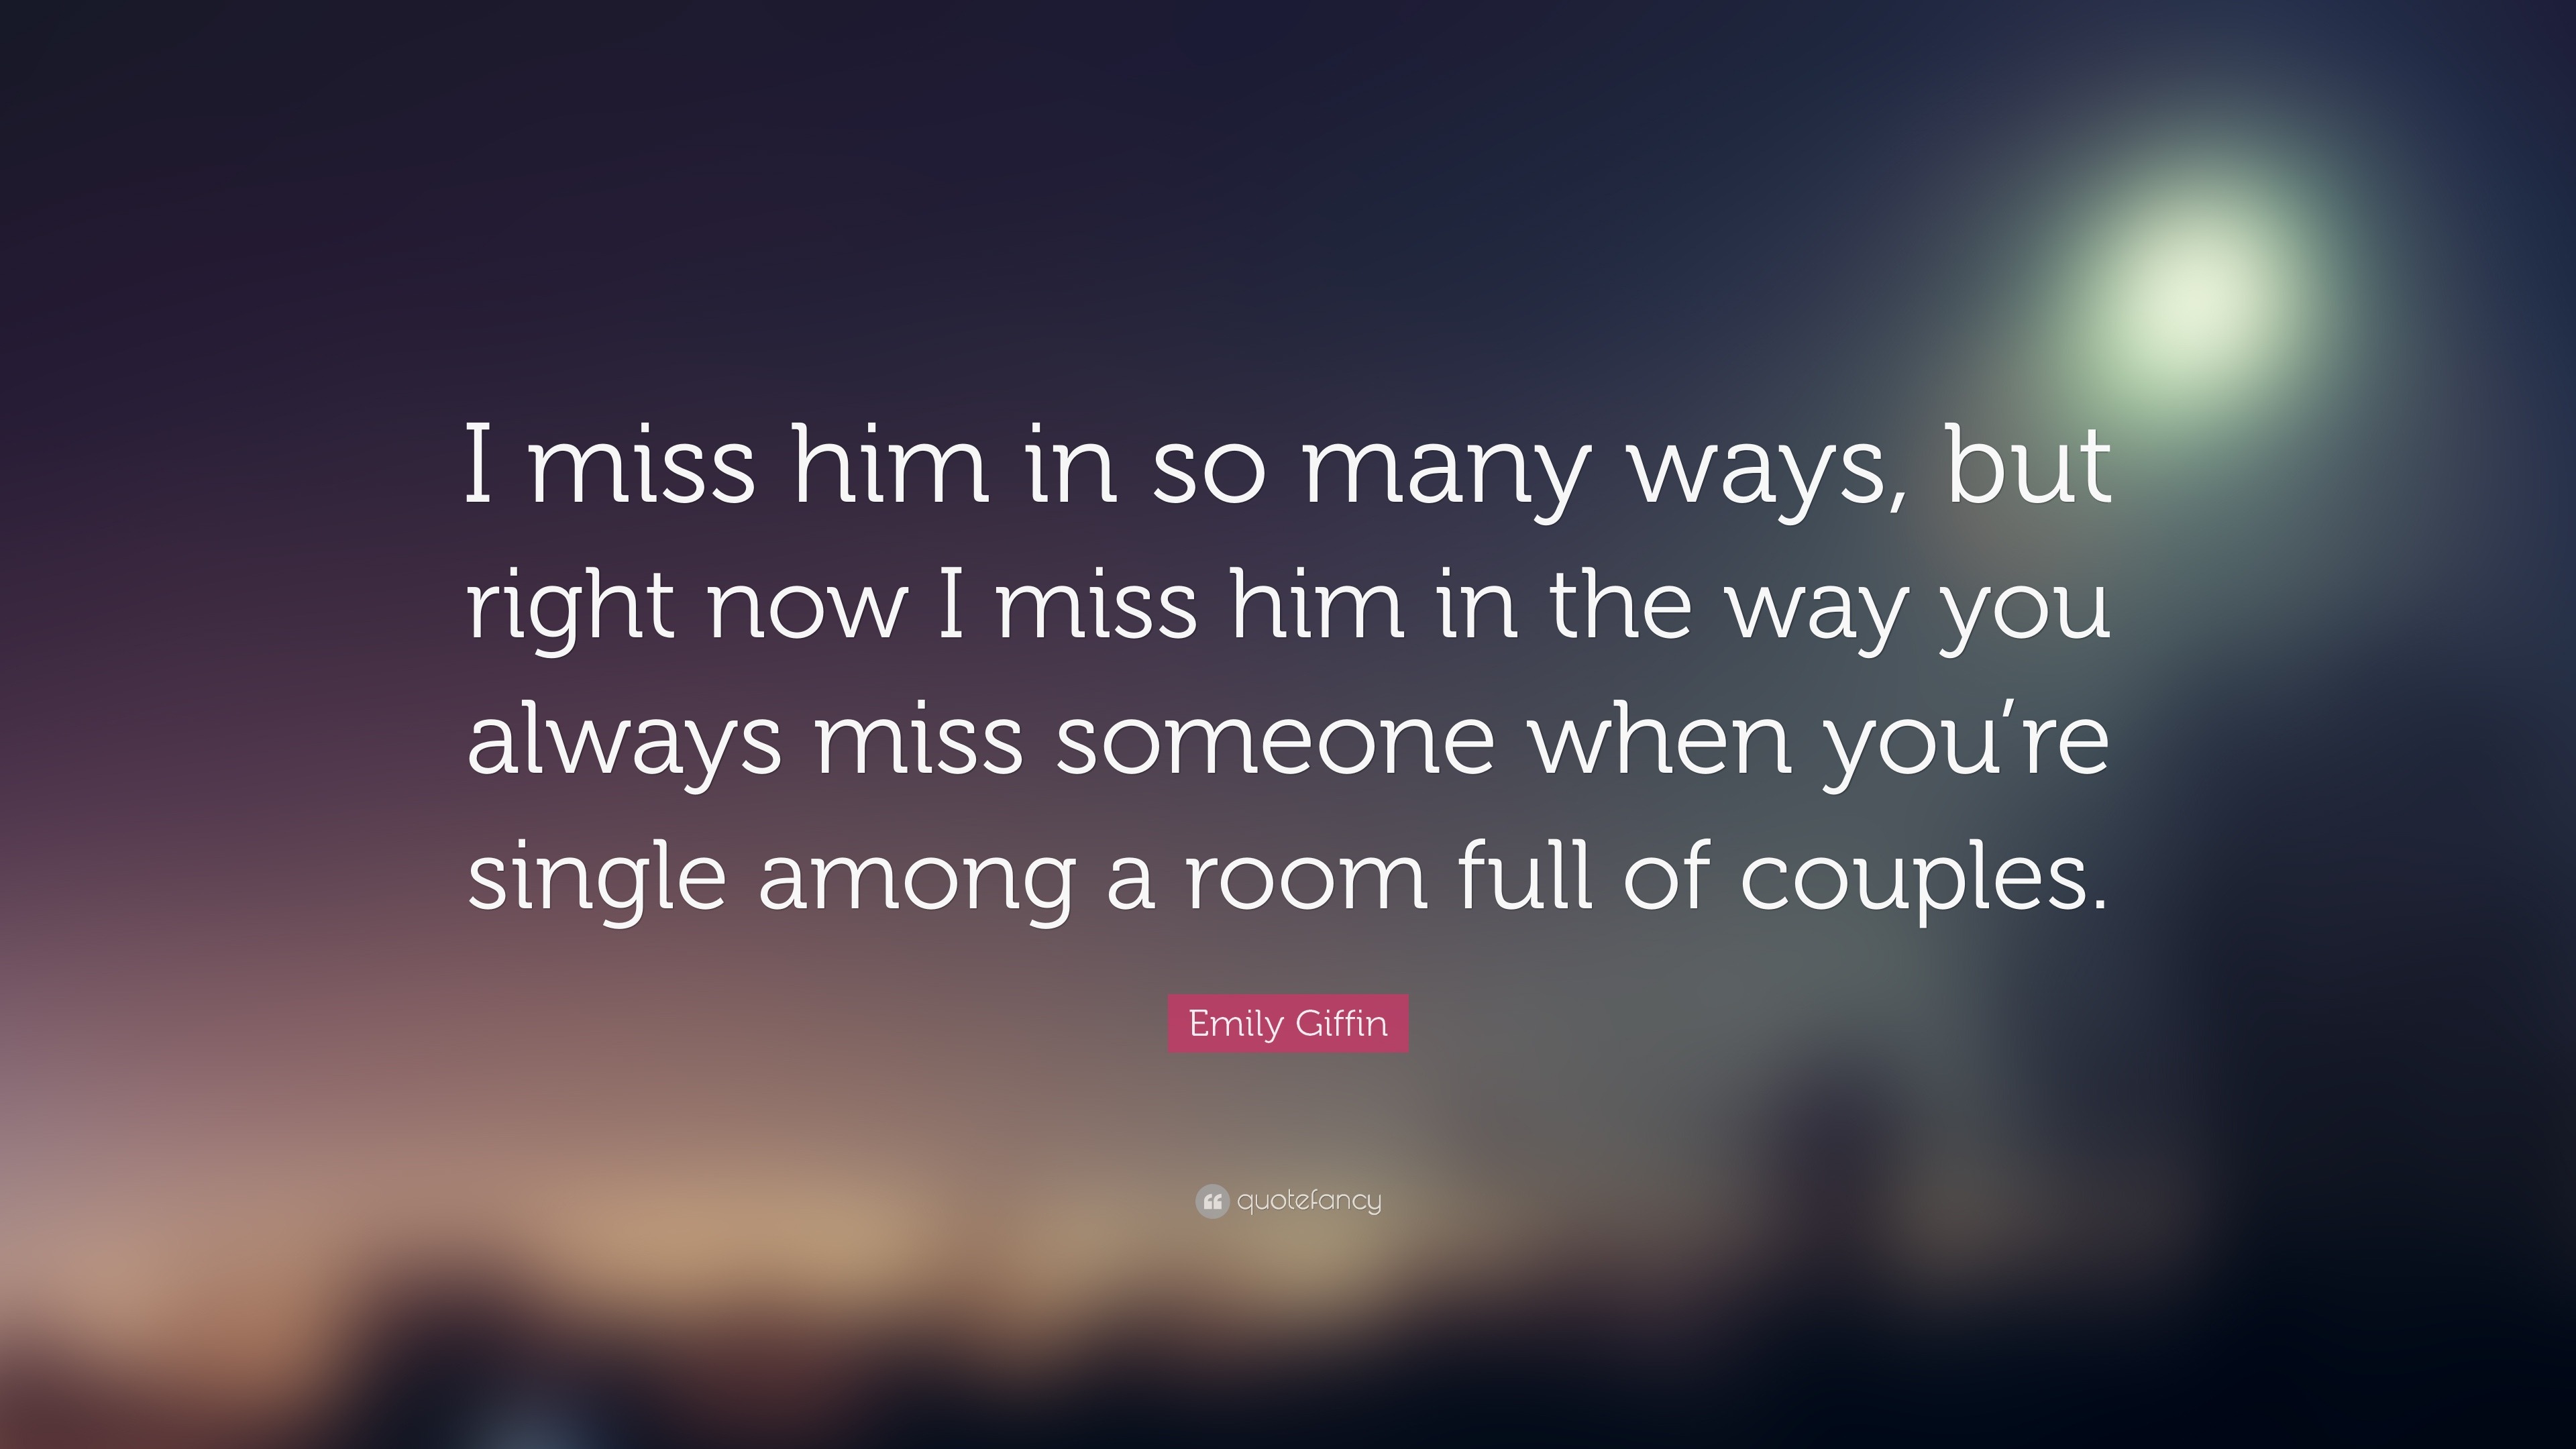 Emily Giffin Quote: "I miss him in so many ways, but right ...